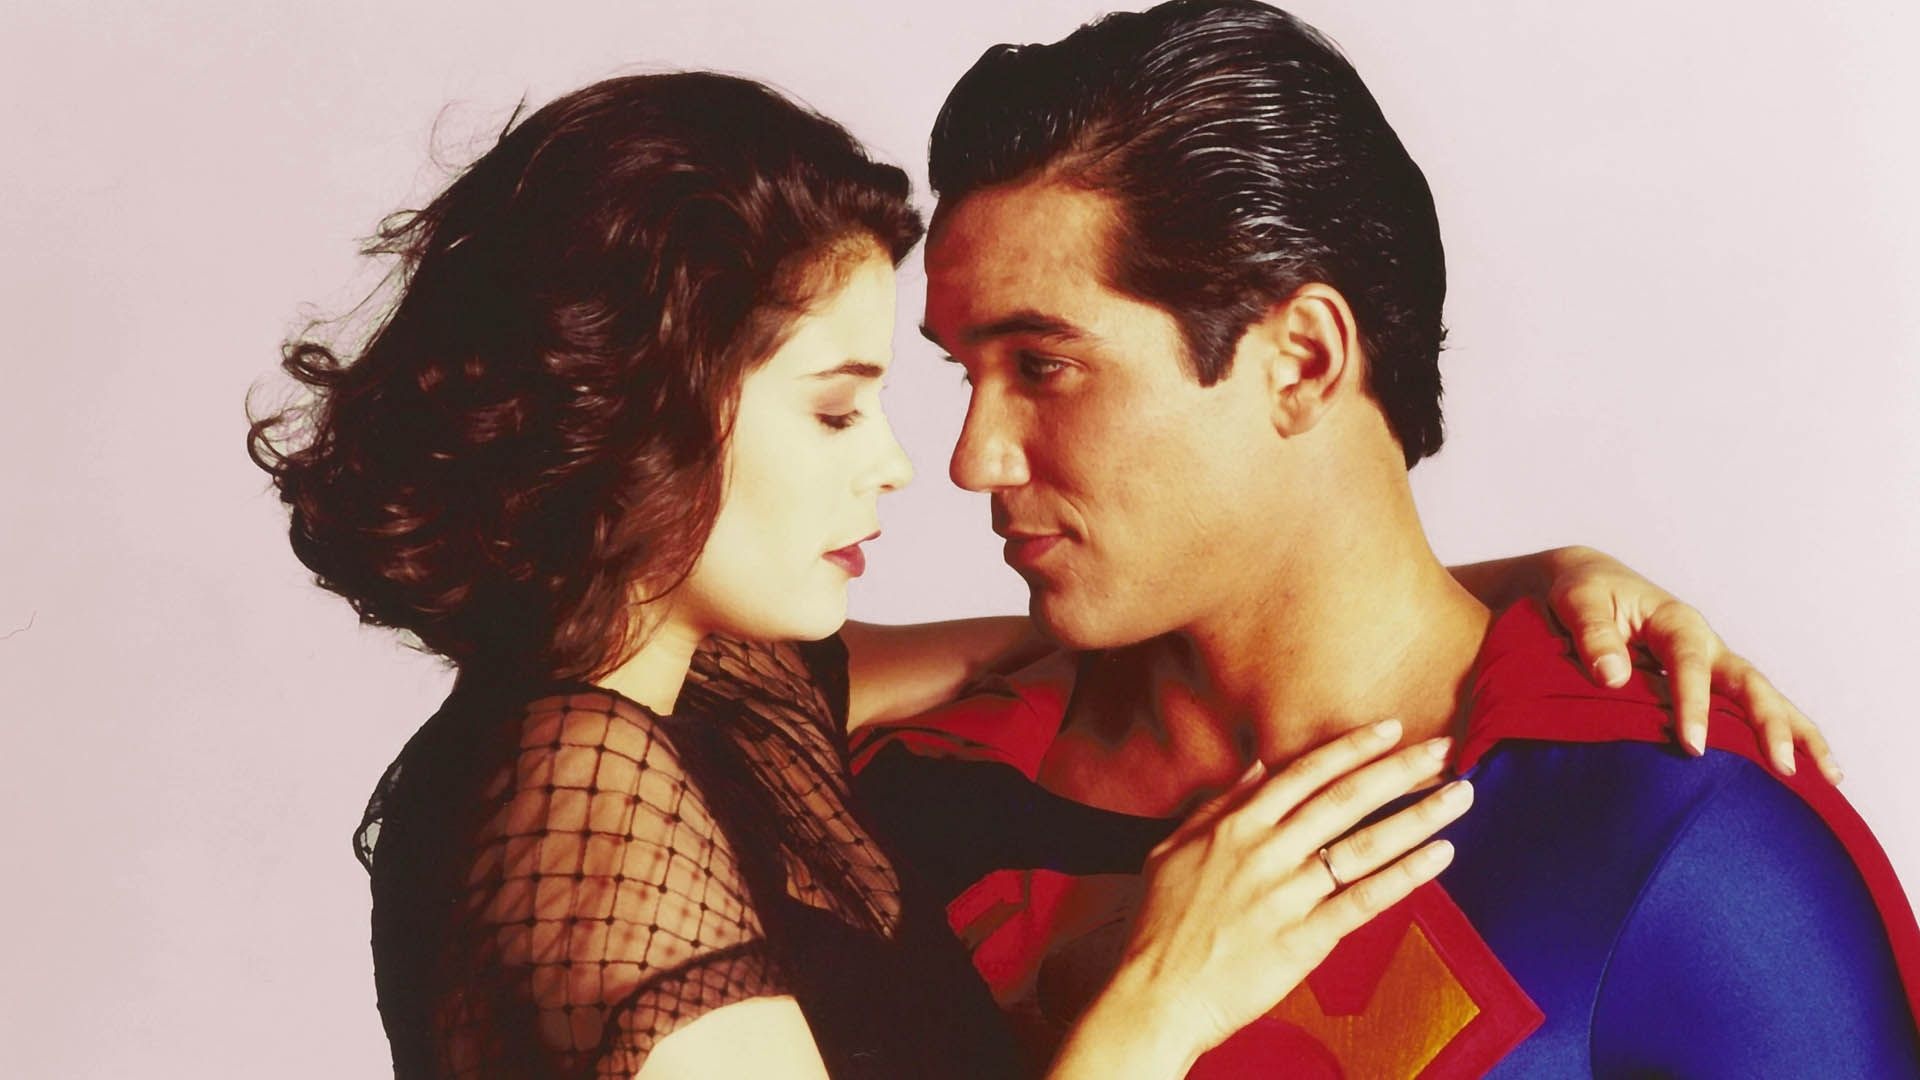 Lois and Clark: The New Adventures of Superman: Teri Hatcher and Dean Cain, Superhero girlfriend, DC Comics, A 90s sci-fi television series. 1920x1080 Full HD Wallpaper.